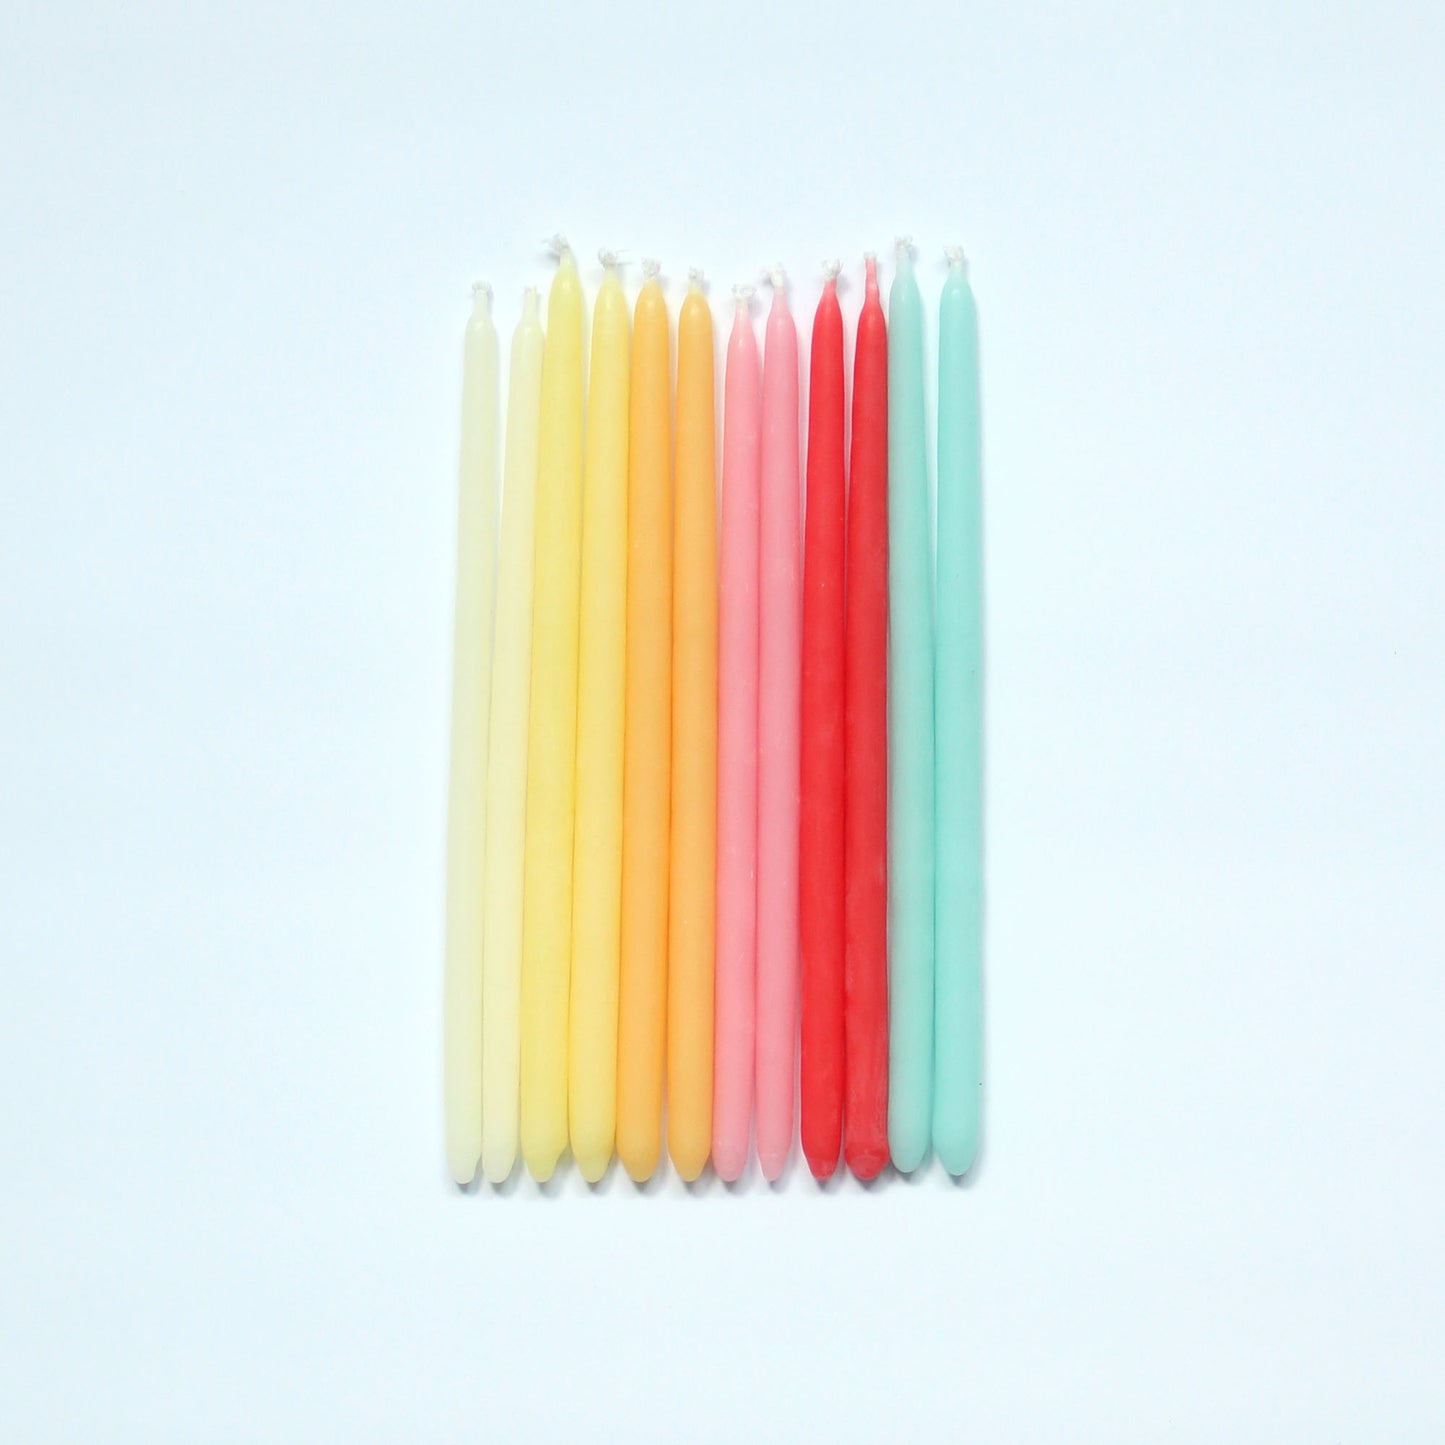 Beeswax Birthday Candles - Sunset Mix